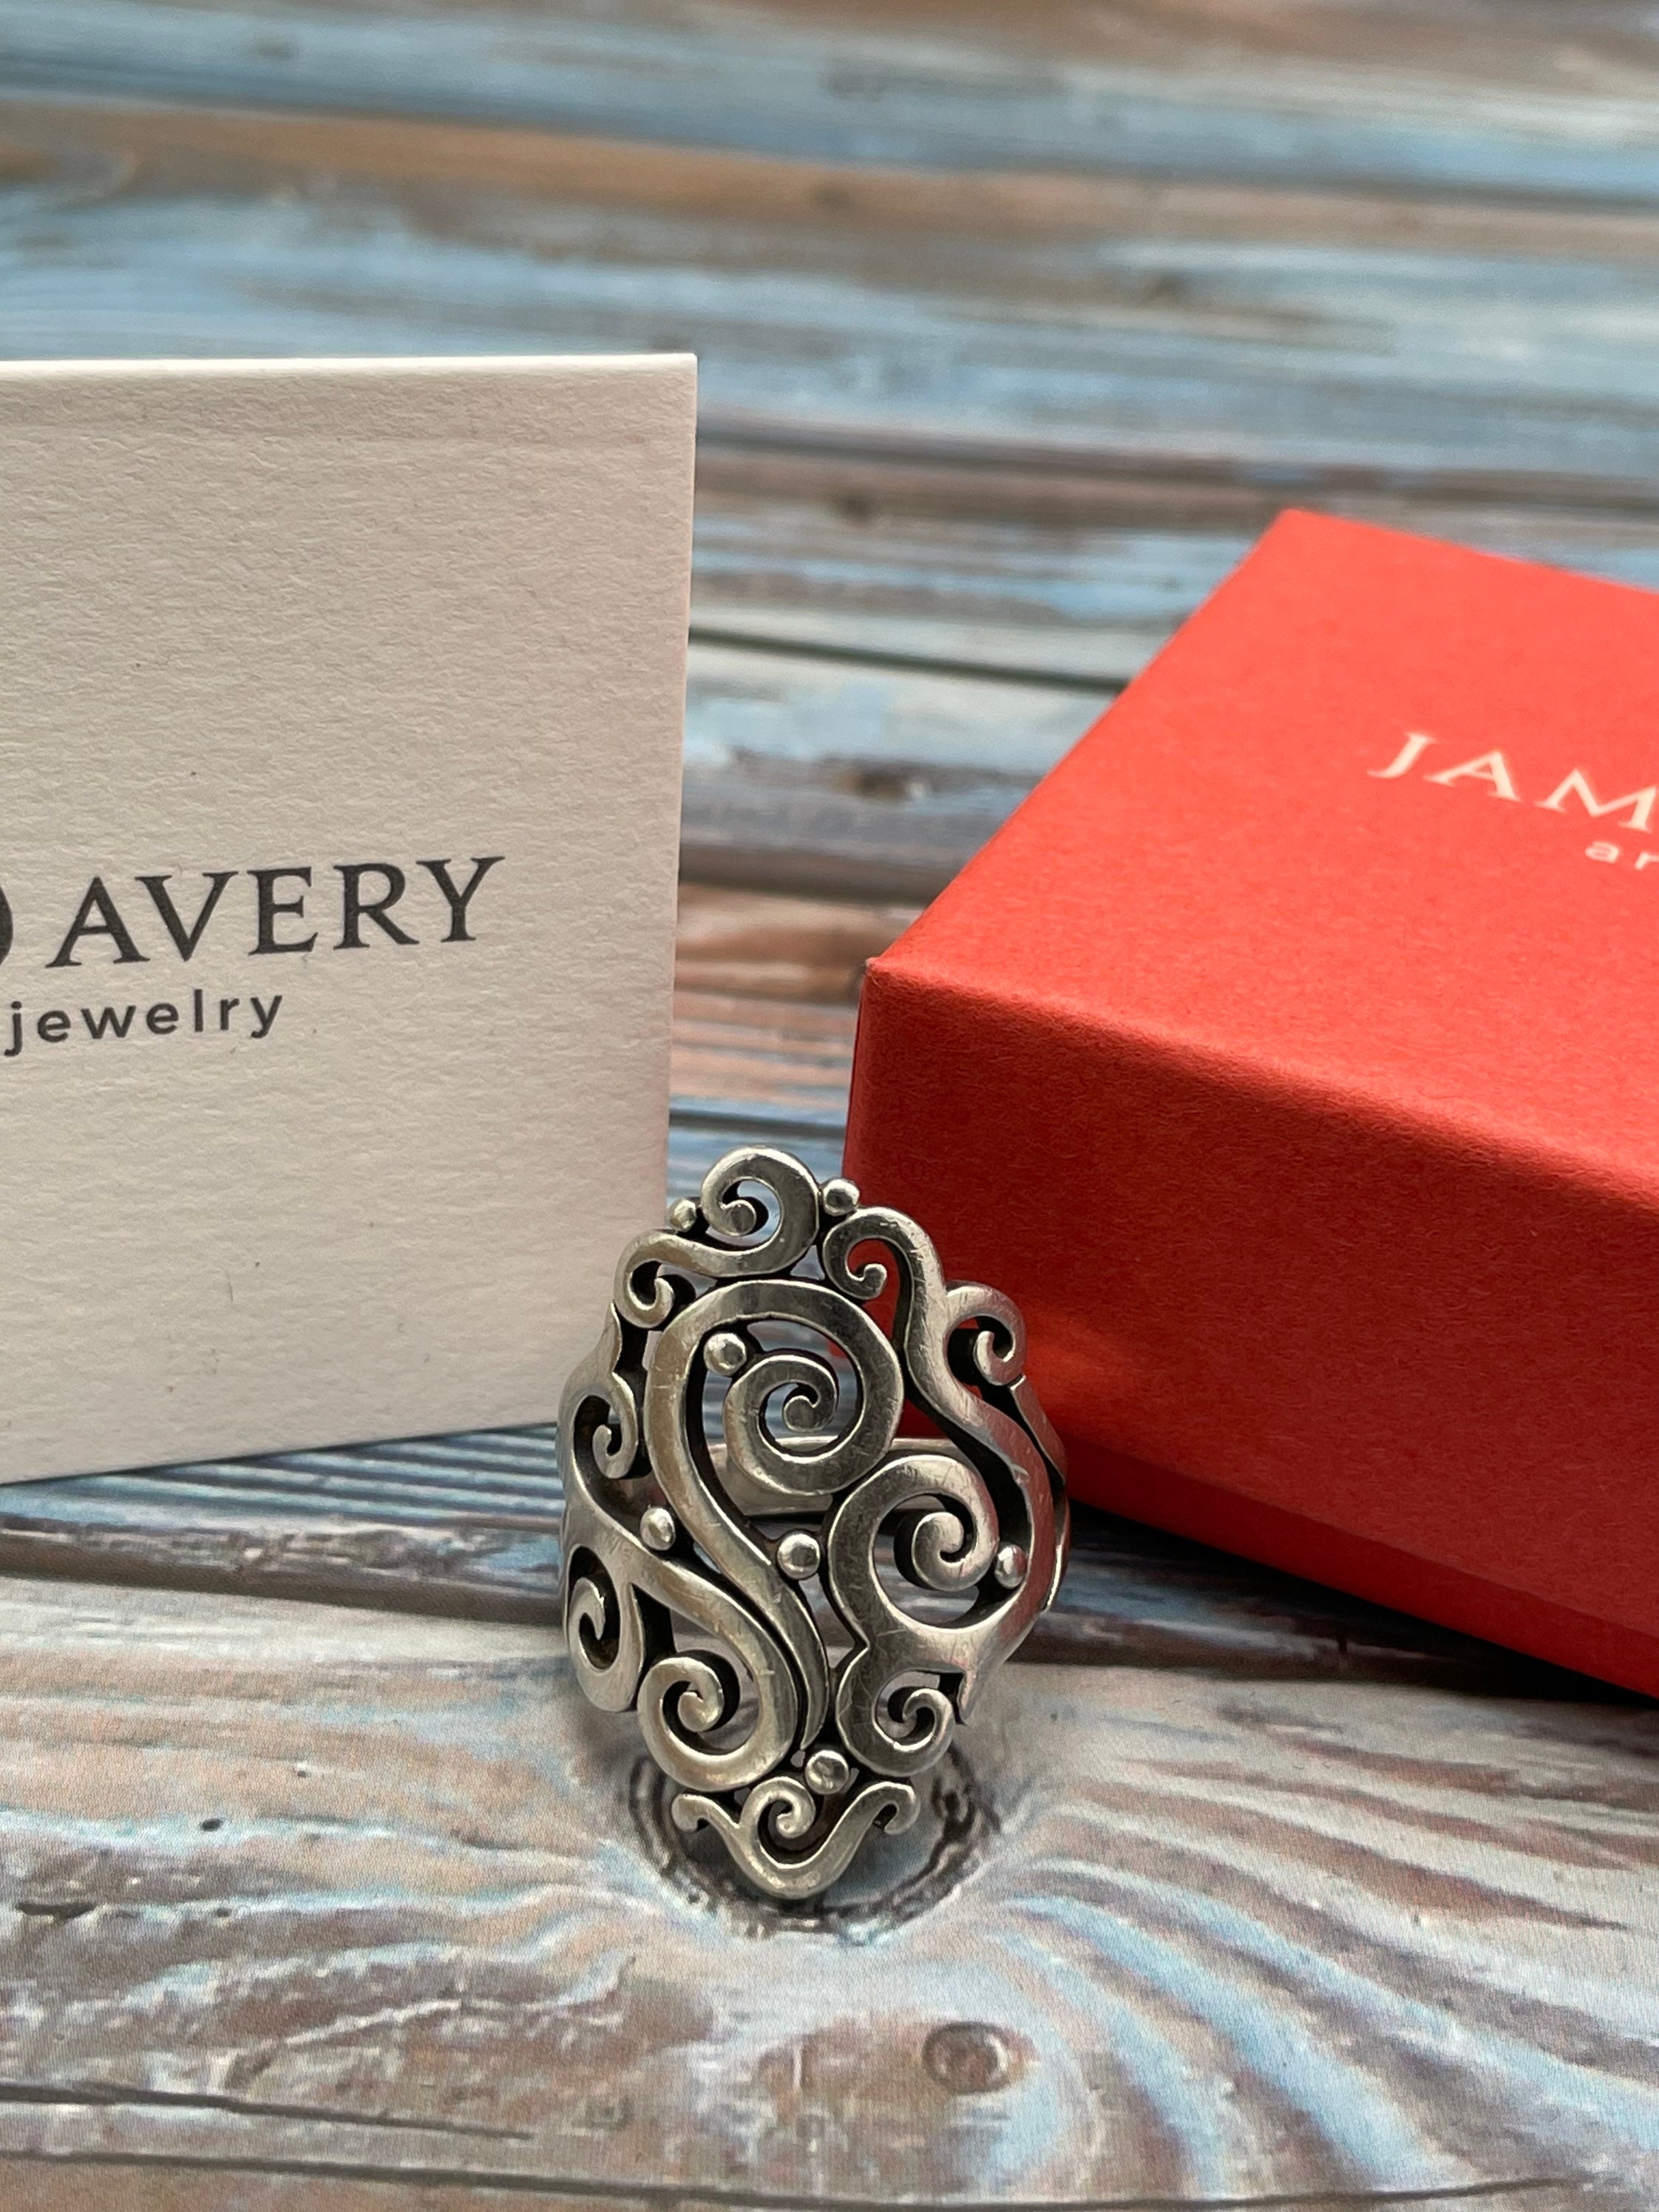 Find just the right ring for... - James Avery Artisan Jewelry | Facebook